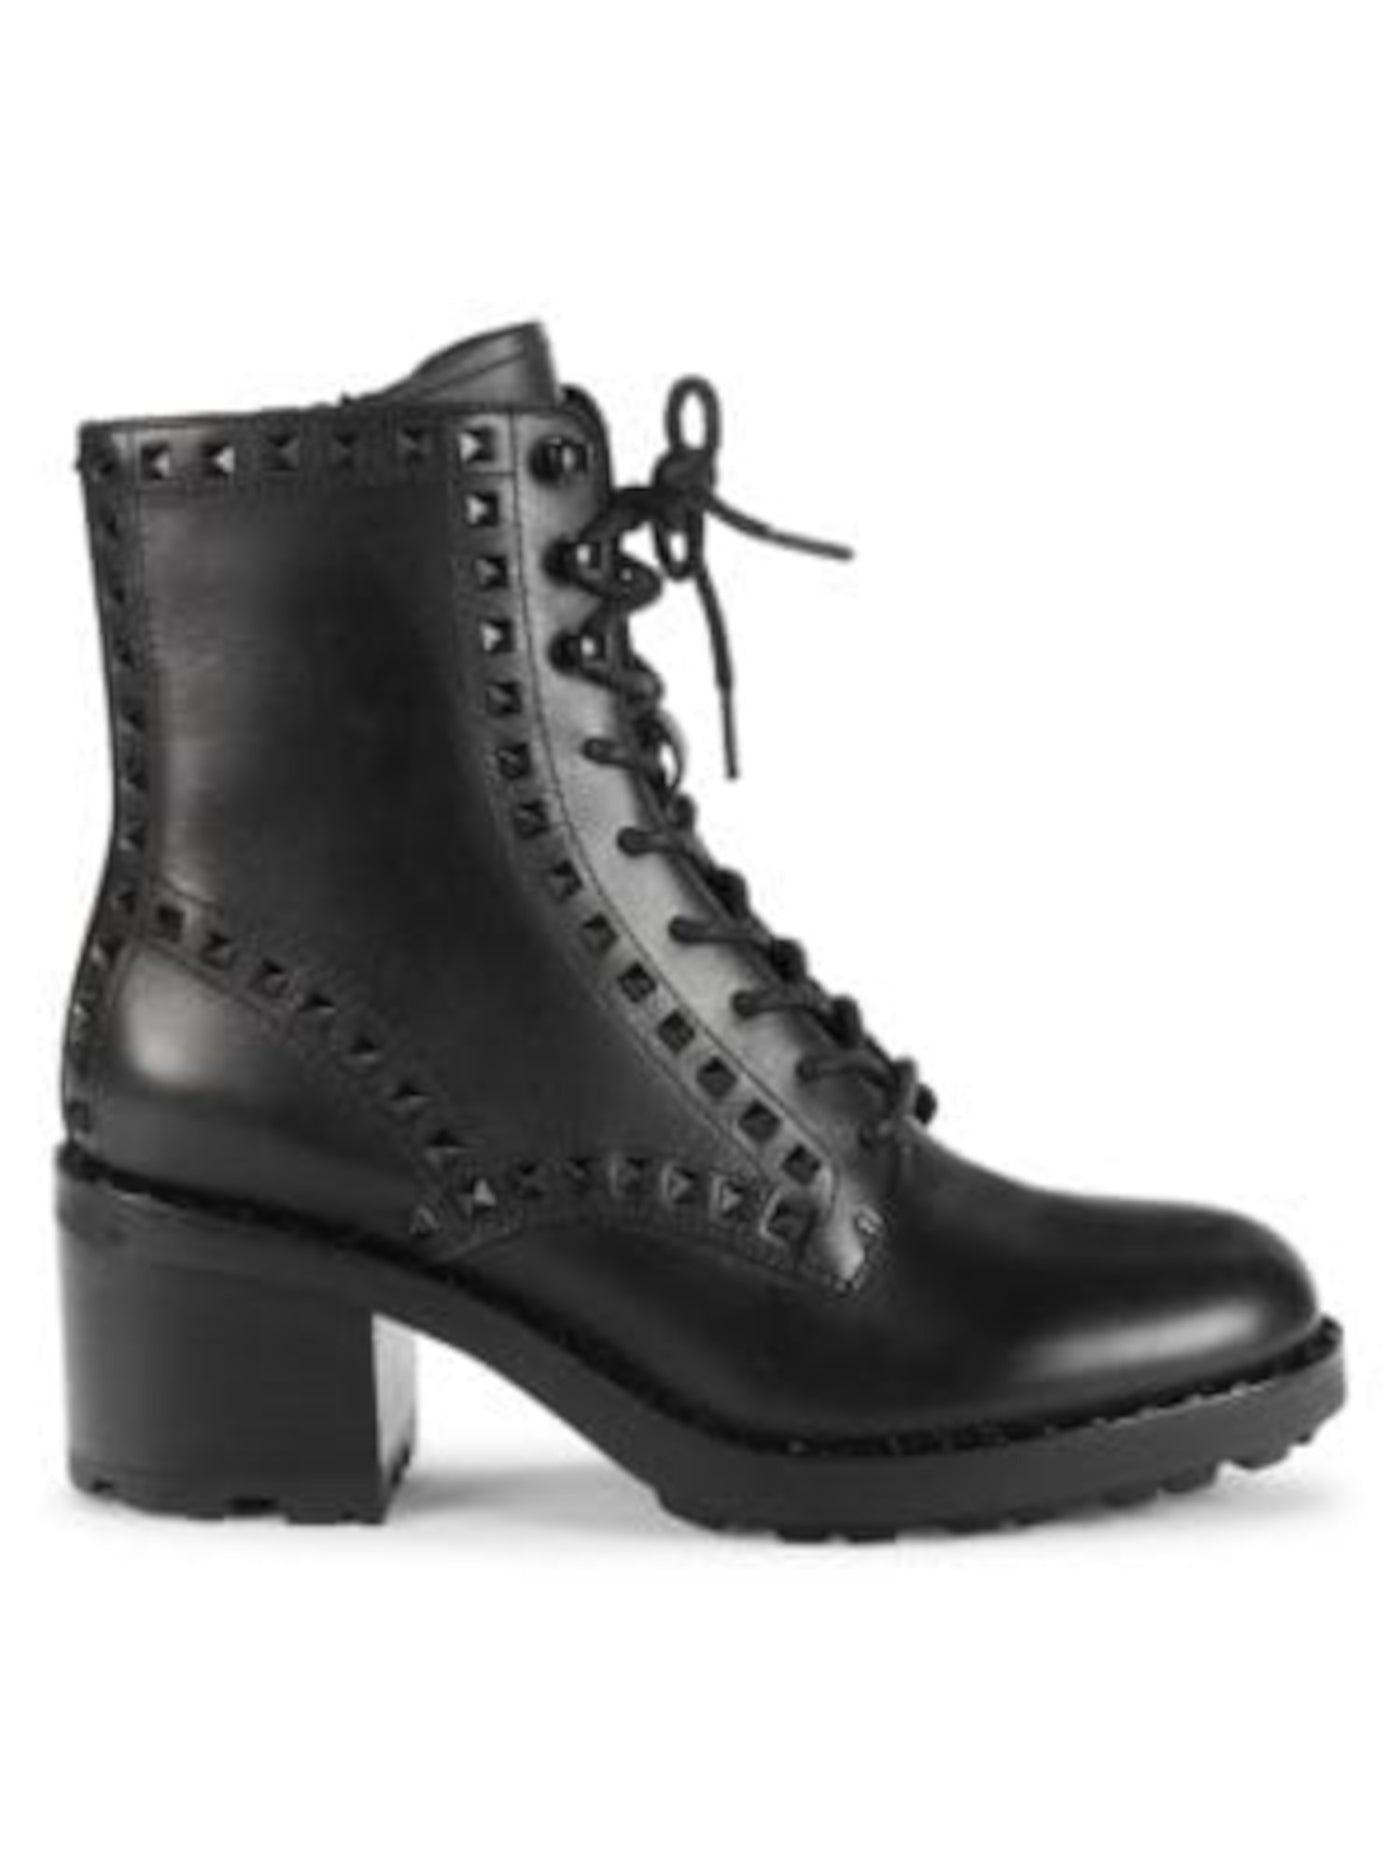 ASH Womens Black Lace-Up Studded Padded Xin Round Toe Block Heel Zip-Up Leather Booties 36